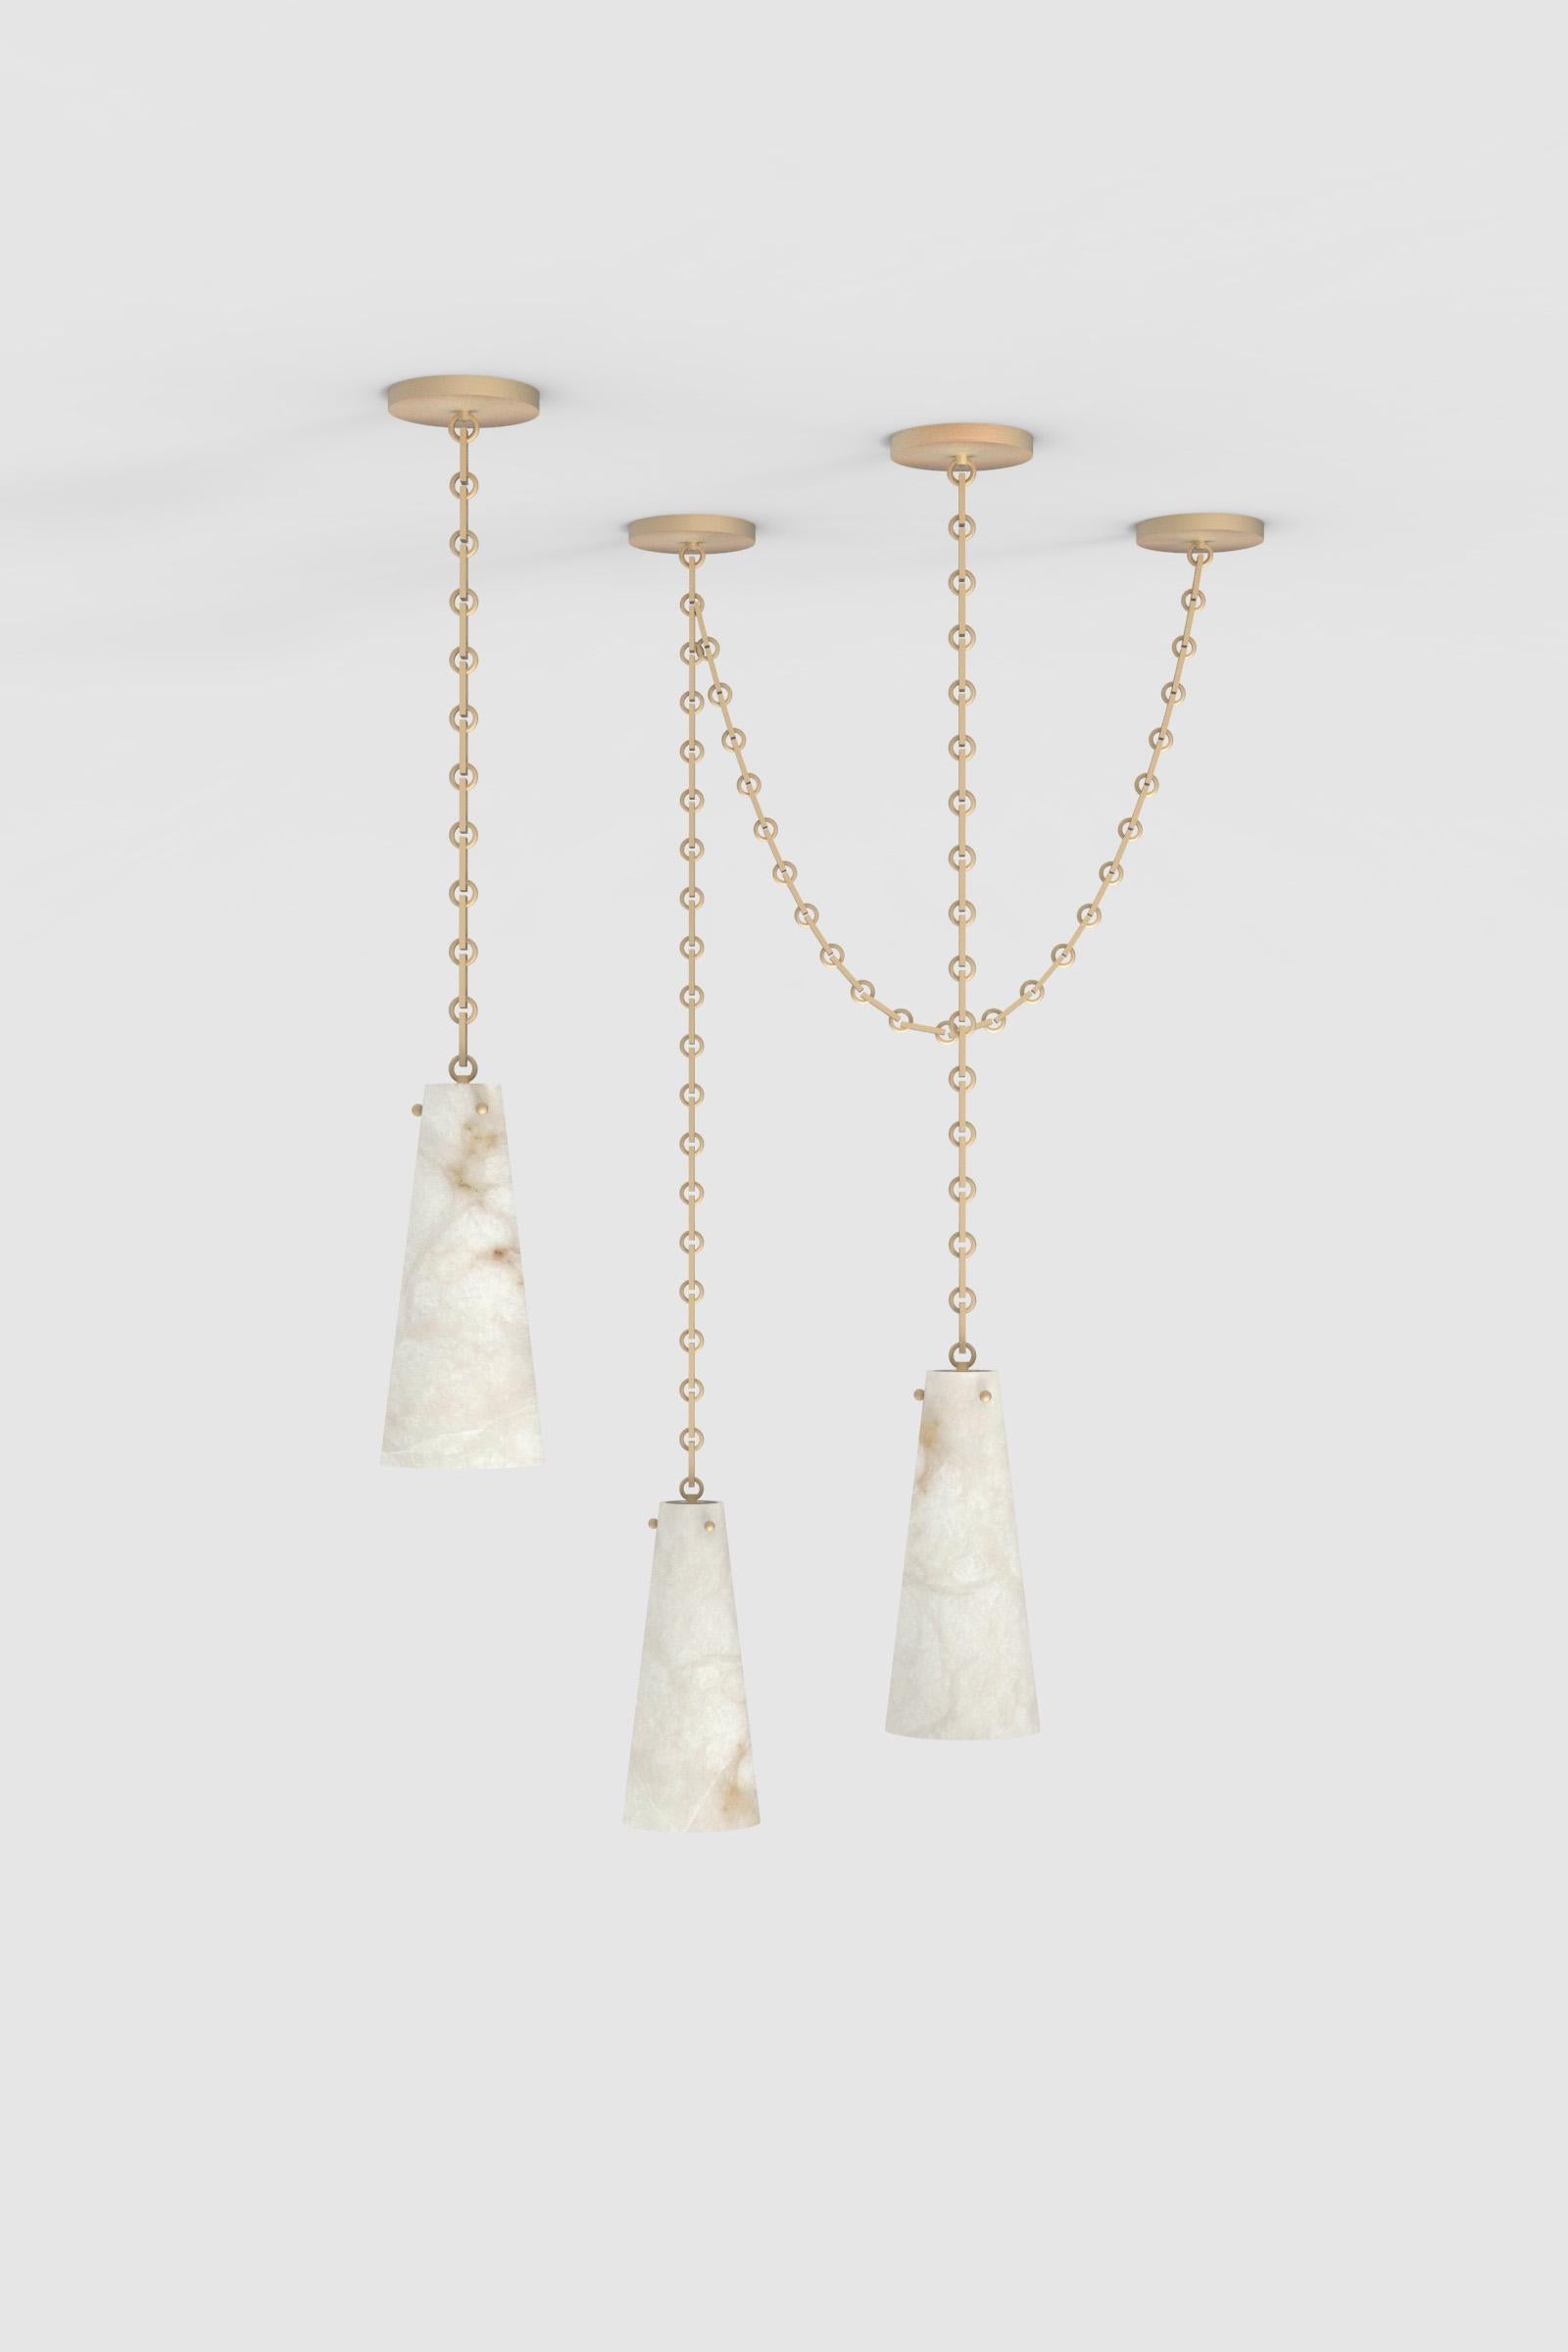 Orphan Work 202A Chandelier BB, 2021
Shown in alabaster with brushed brass
Available in brushed brass and blackened brass
Measures: 15” H x 6 1/2” W
height and width to order*
canopy 6